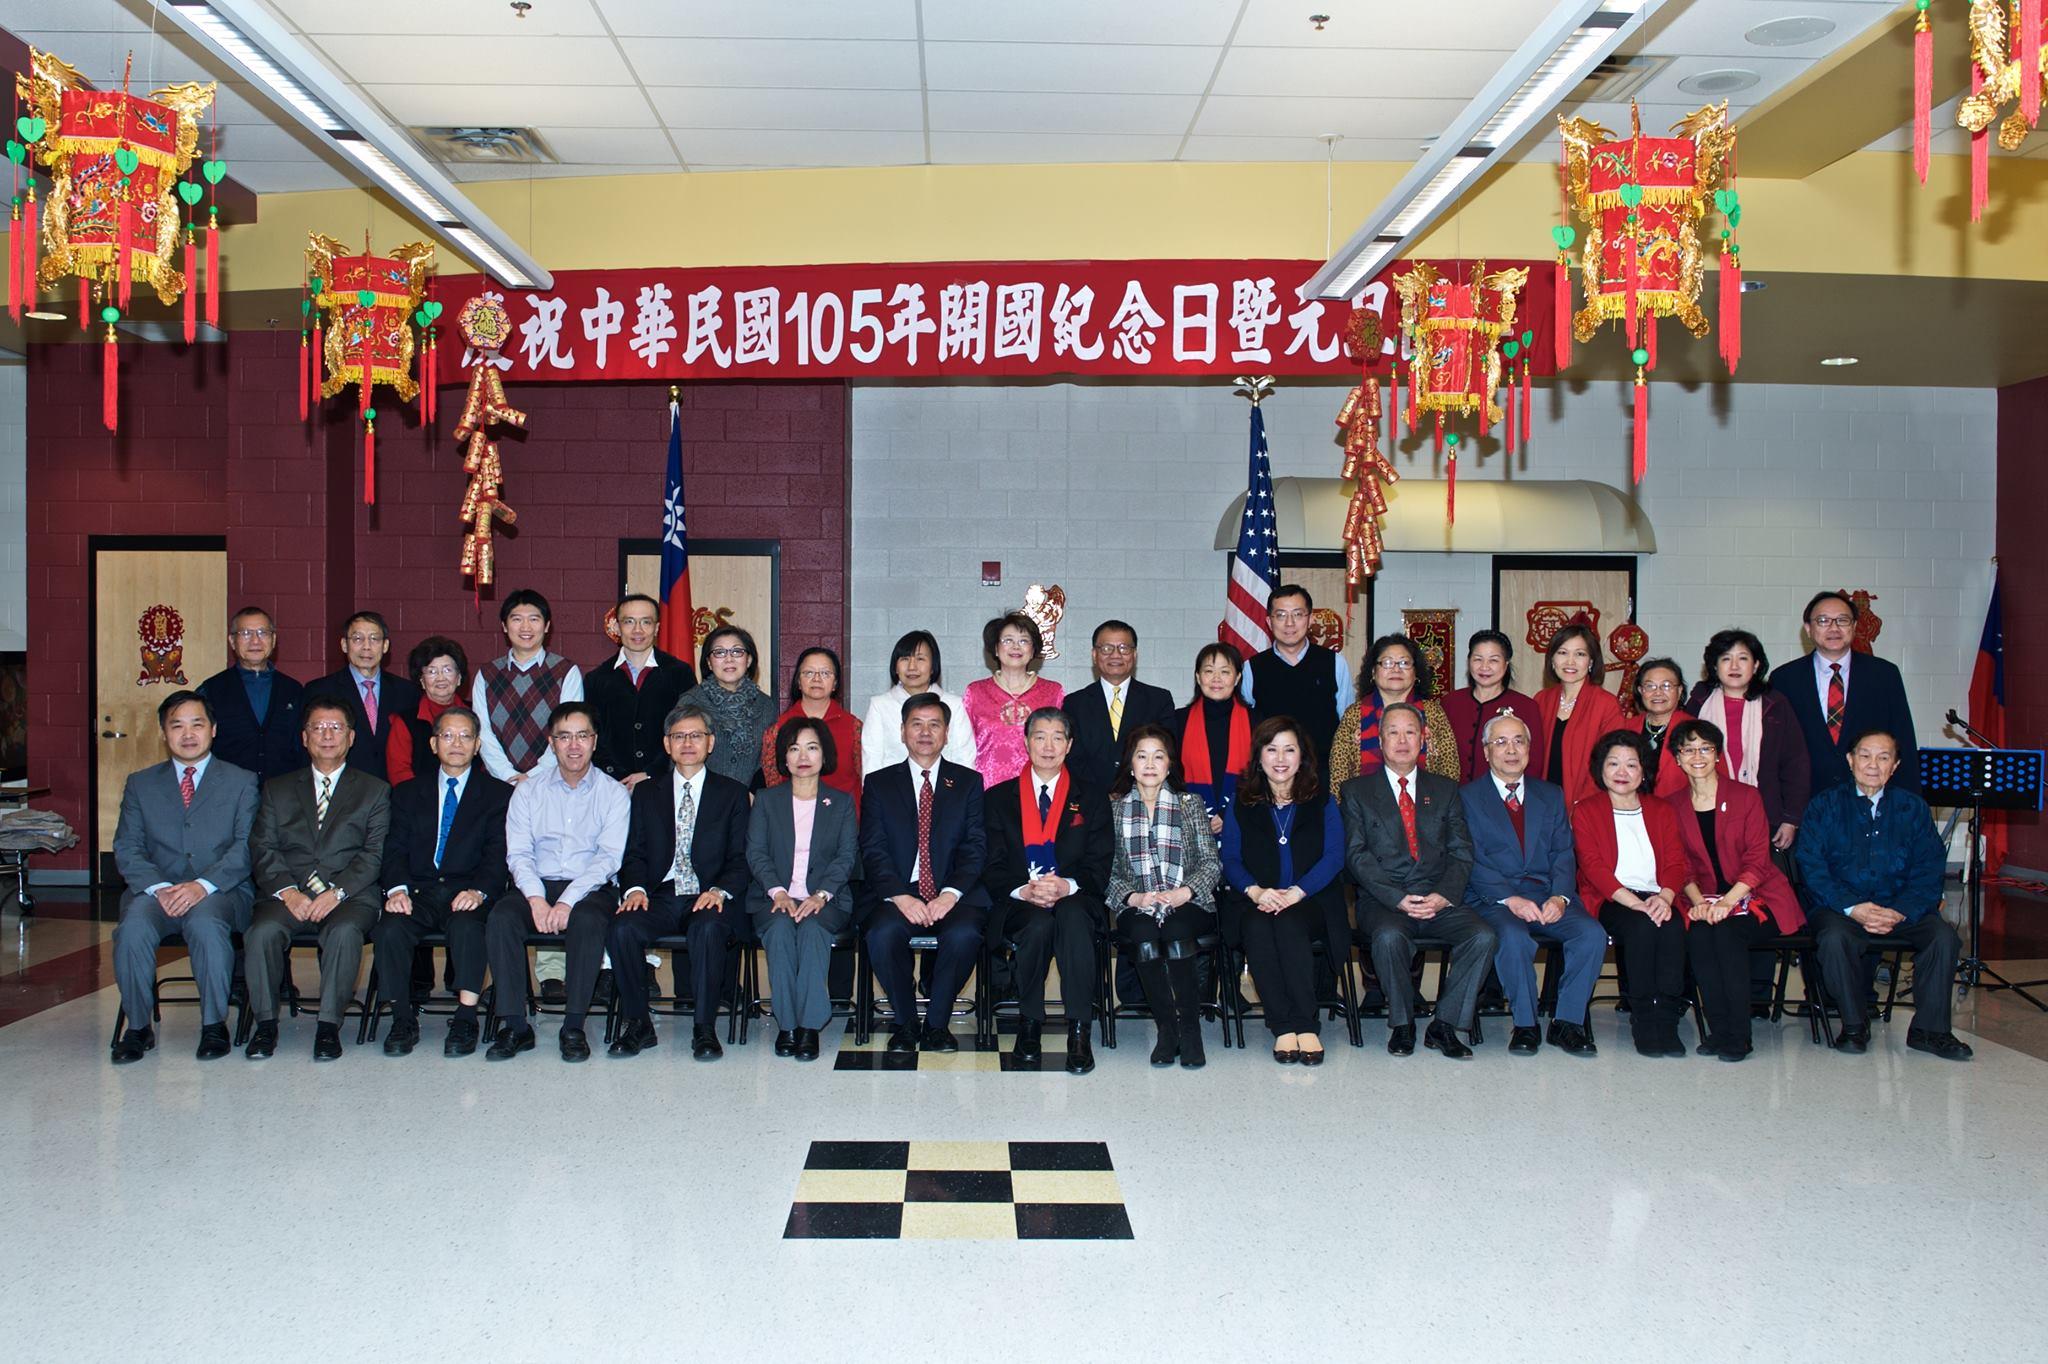 The Chinese/Taiwanese communities gathered together to extend New Year’s wishes to each other after the flag-raising ceremony. In his remarks, Representative Shen emphasized that there are currently 161 countries and territories which offer visa waiver treatment to passport holders of ROC (Taiwan), which makes traveling more convenient for our citizens. Moreover, under the “1992 Consensus” and President Ying-jeou Ma’s Mainland China policy, Taiwan enjoyed an aggregate trade surplus of US$552.93 billion over the past seven years. Community leaders offered their New Year’s blessings to the participants as well.